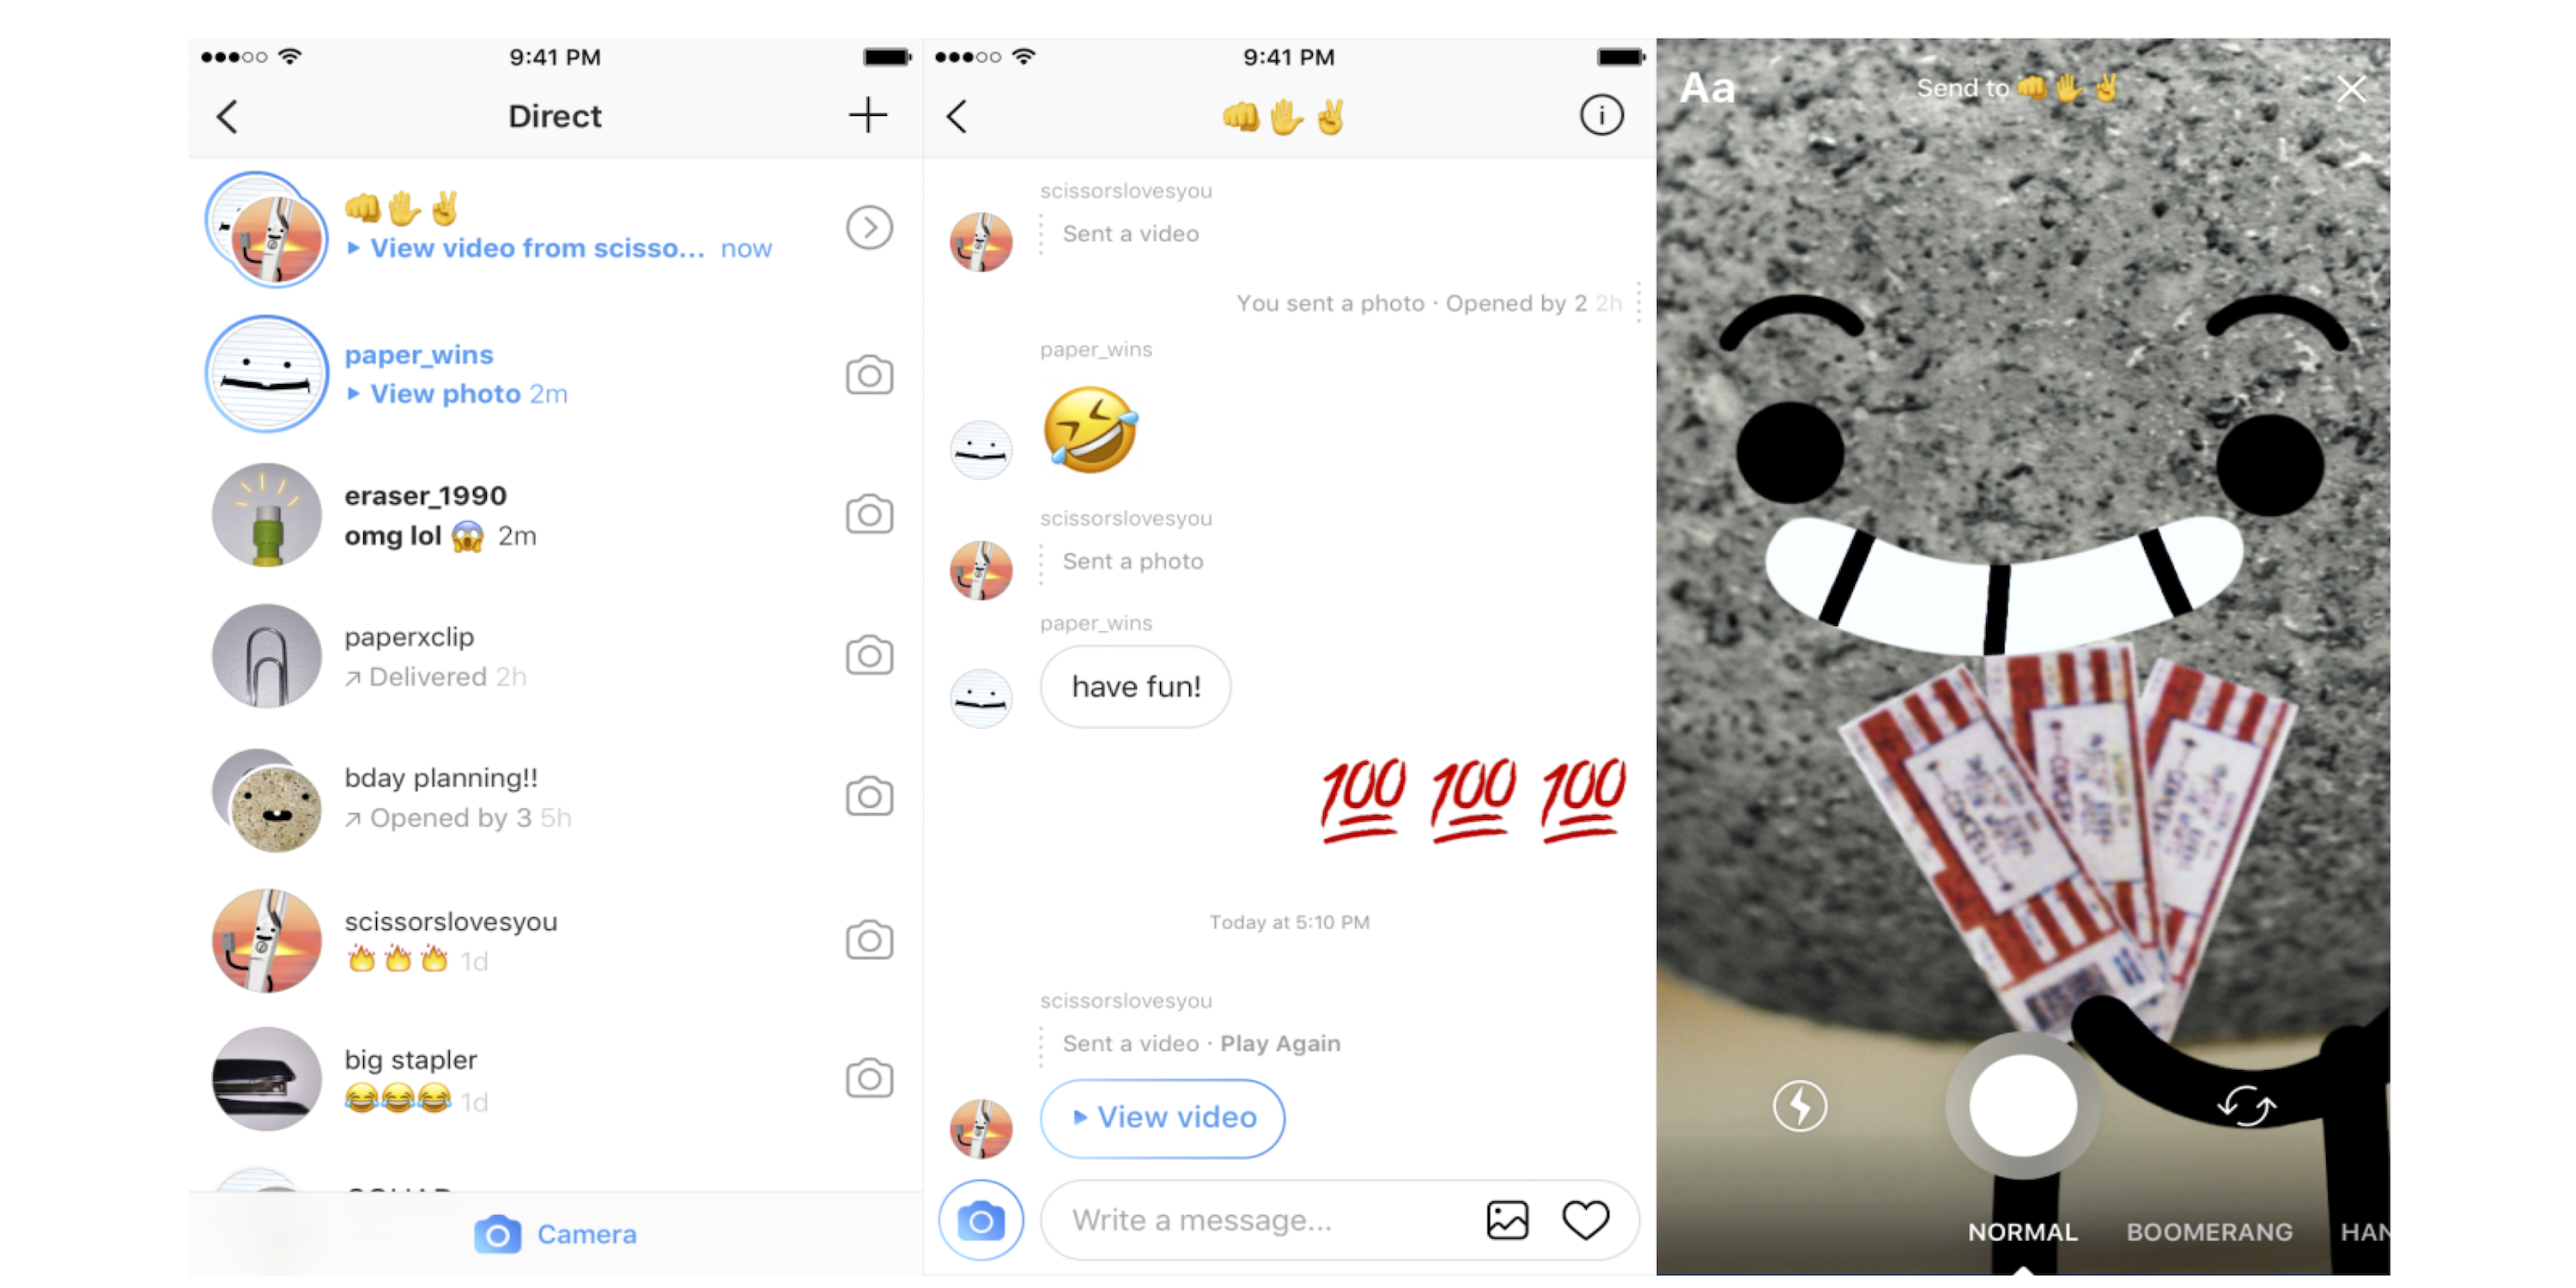 Instagram Now Combines Disappearing Photos And Video W Direct Messages 